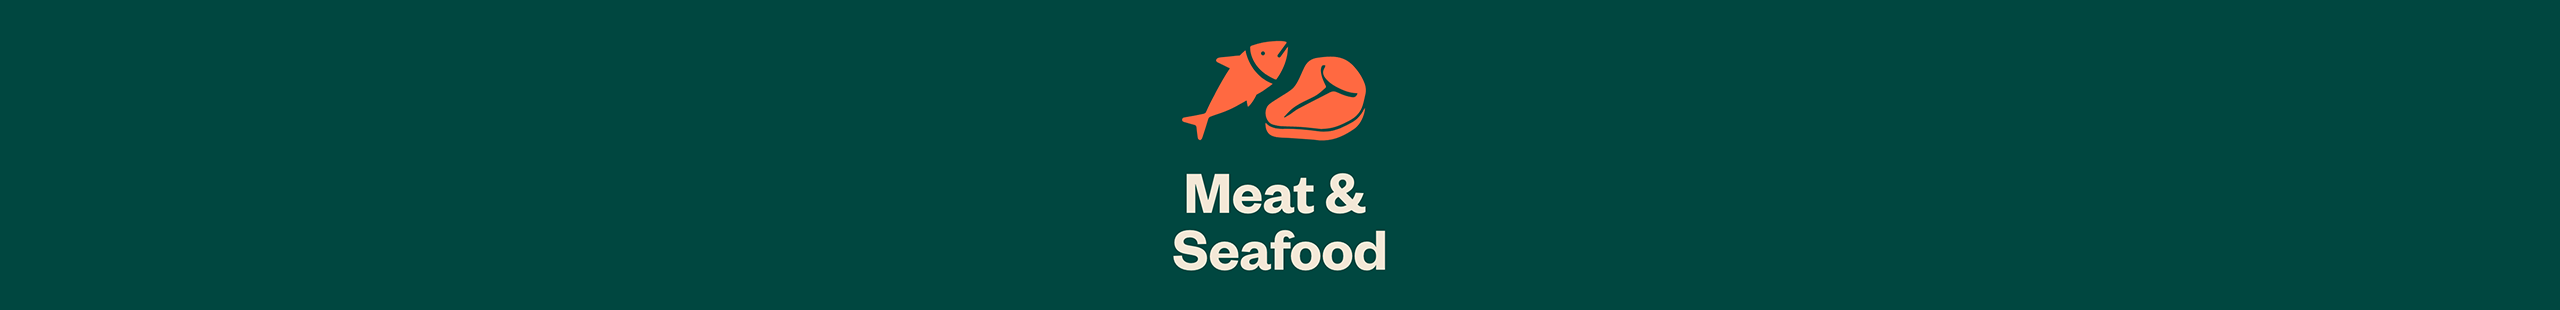 Meat & Seafood